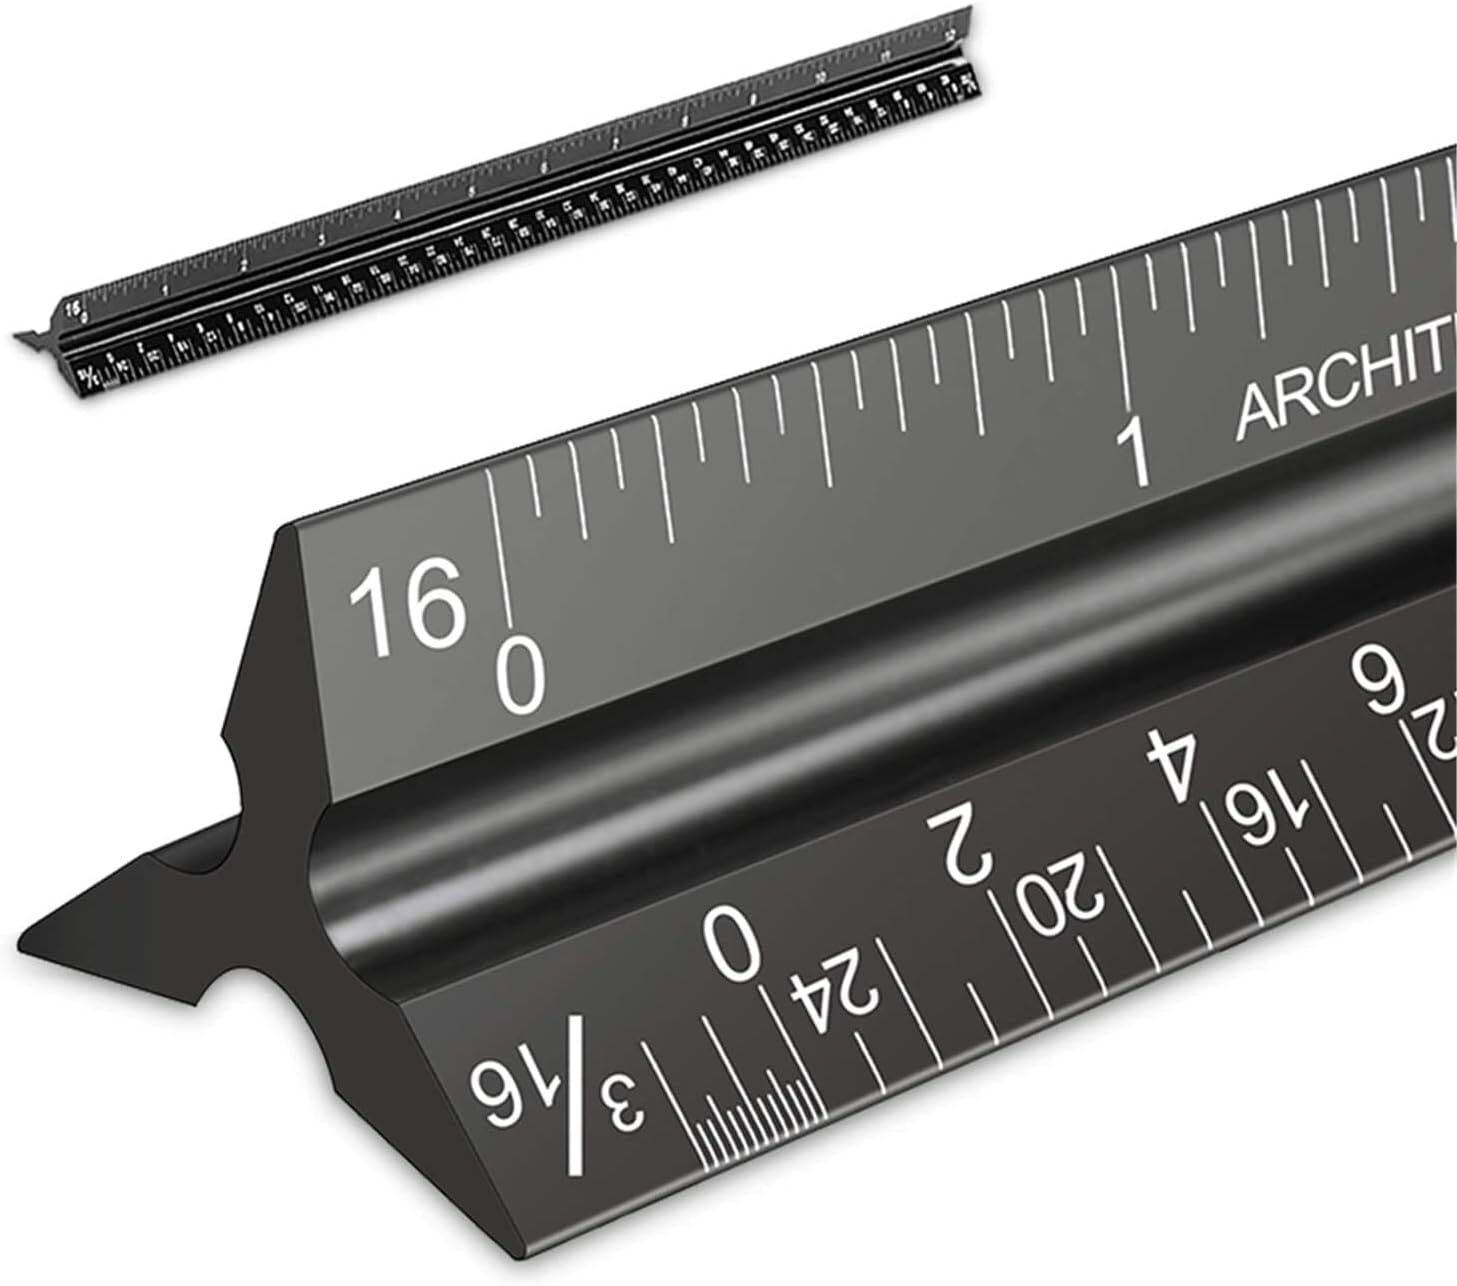 Architectural Scale Ruler for Blueprint,12''Metric Metal Engineer for Architects